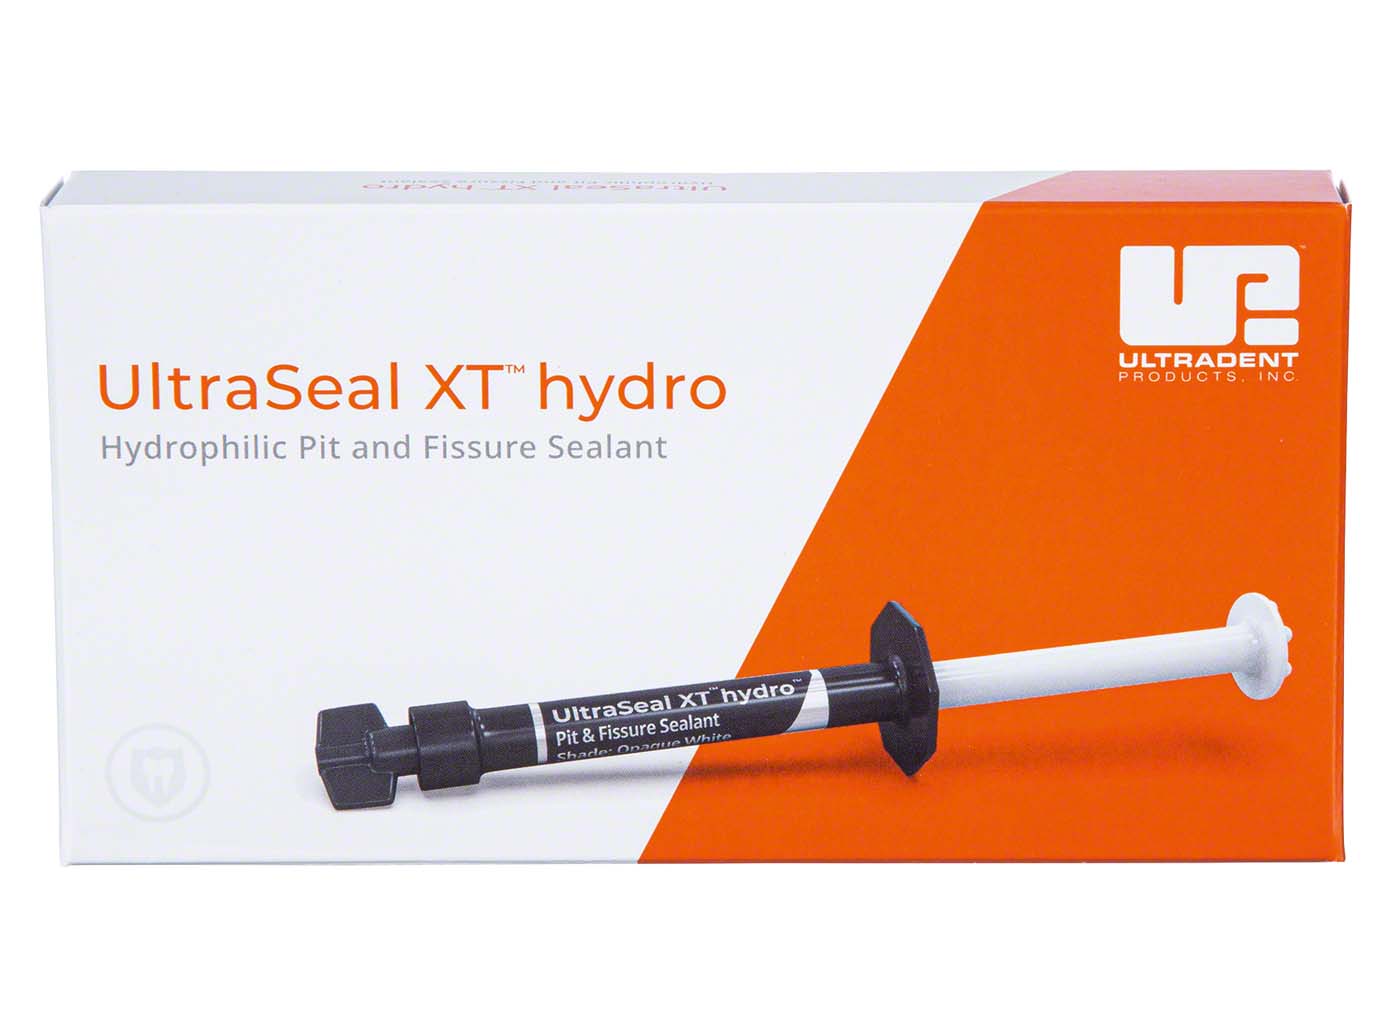 UltraSeal XT™ hydro™ Ultradent Products